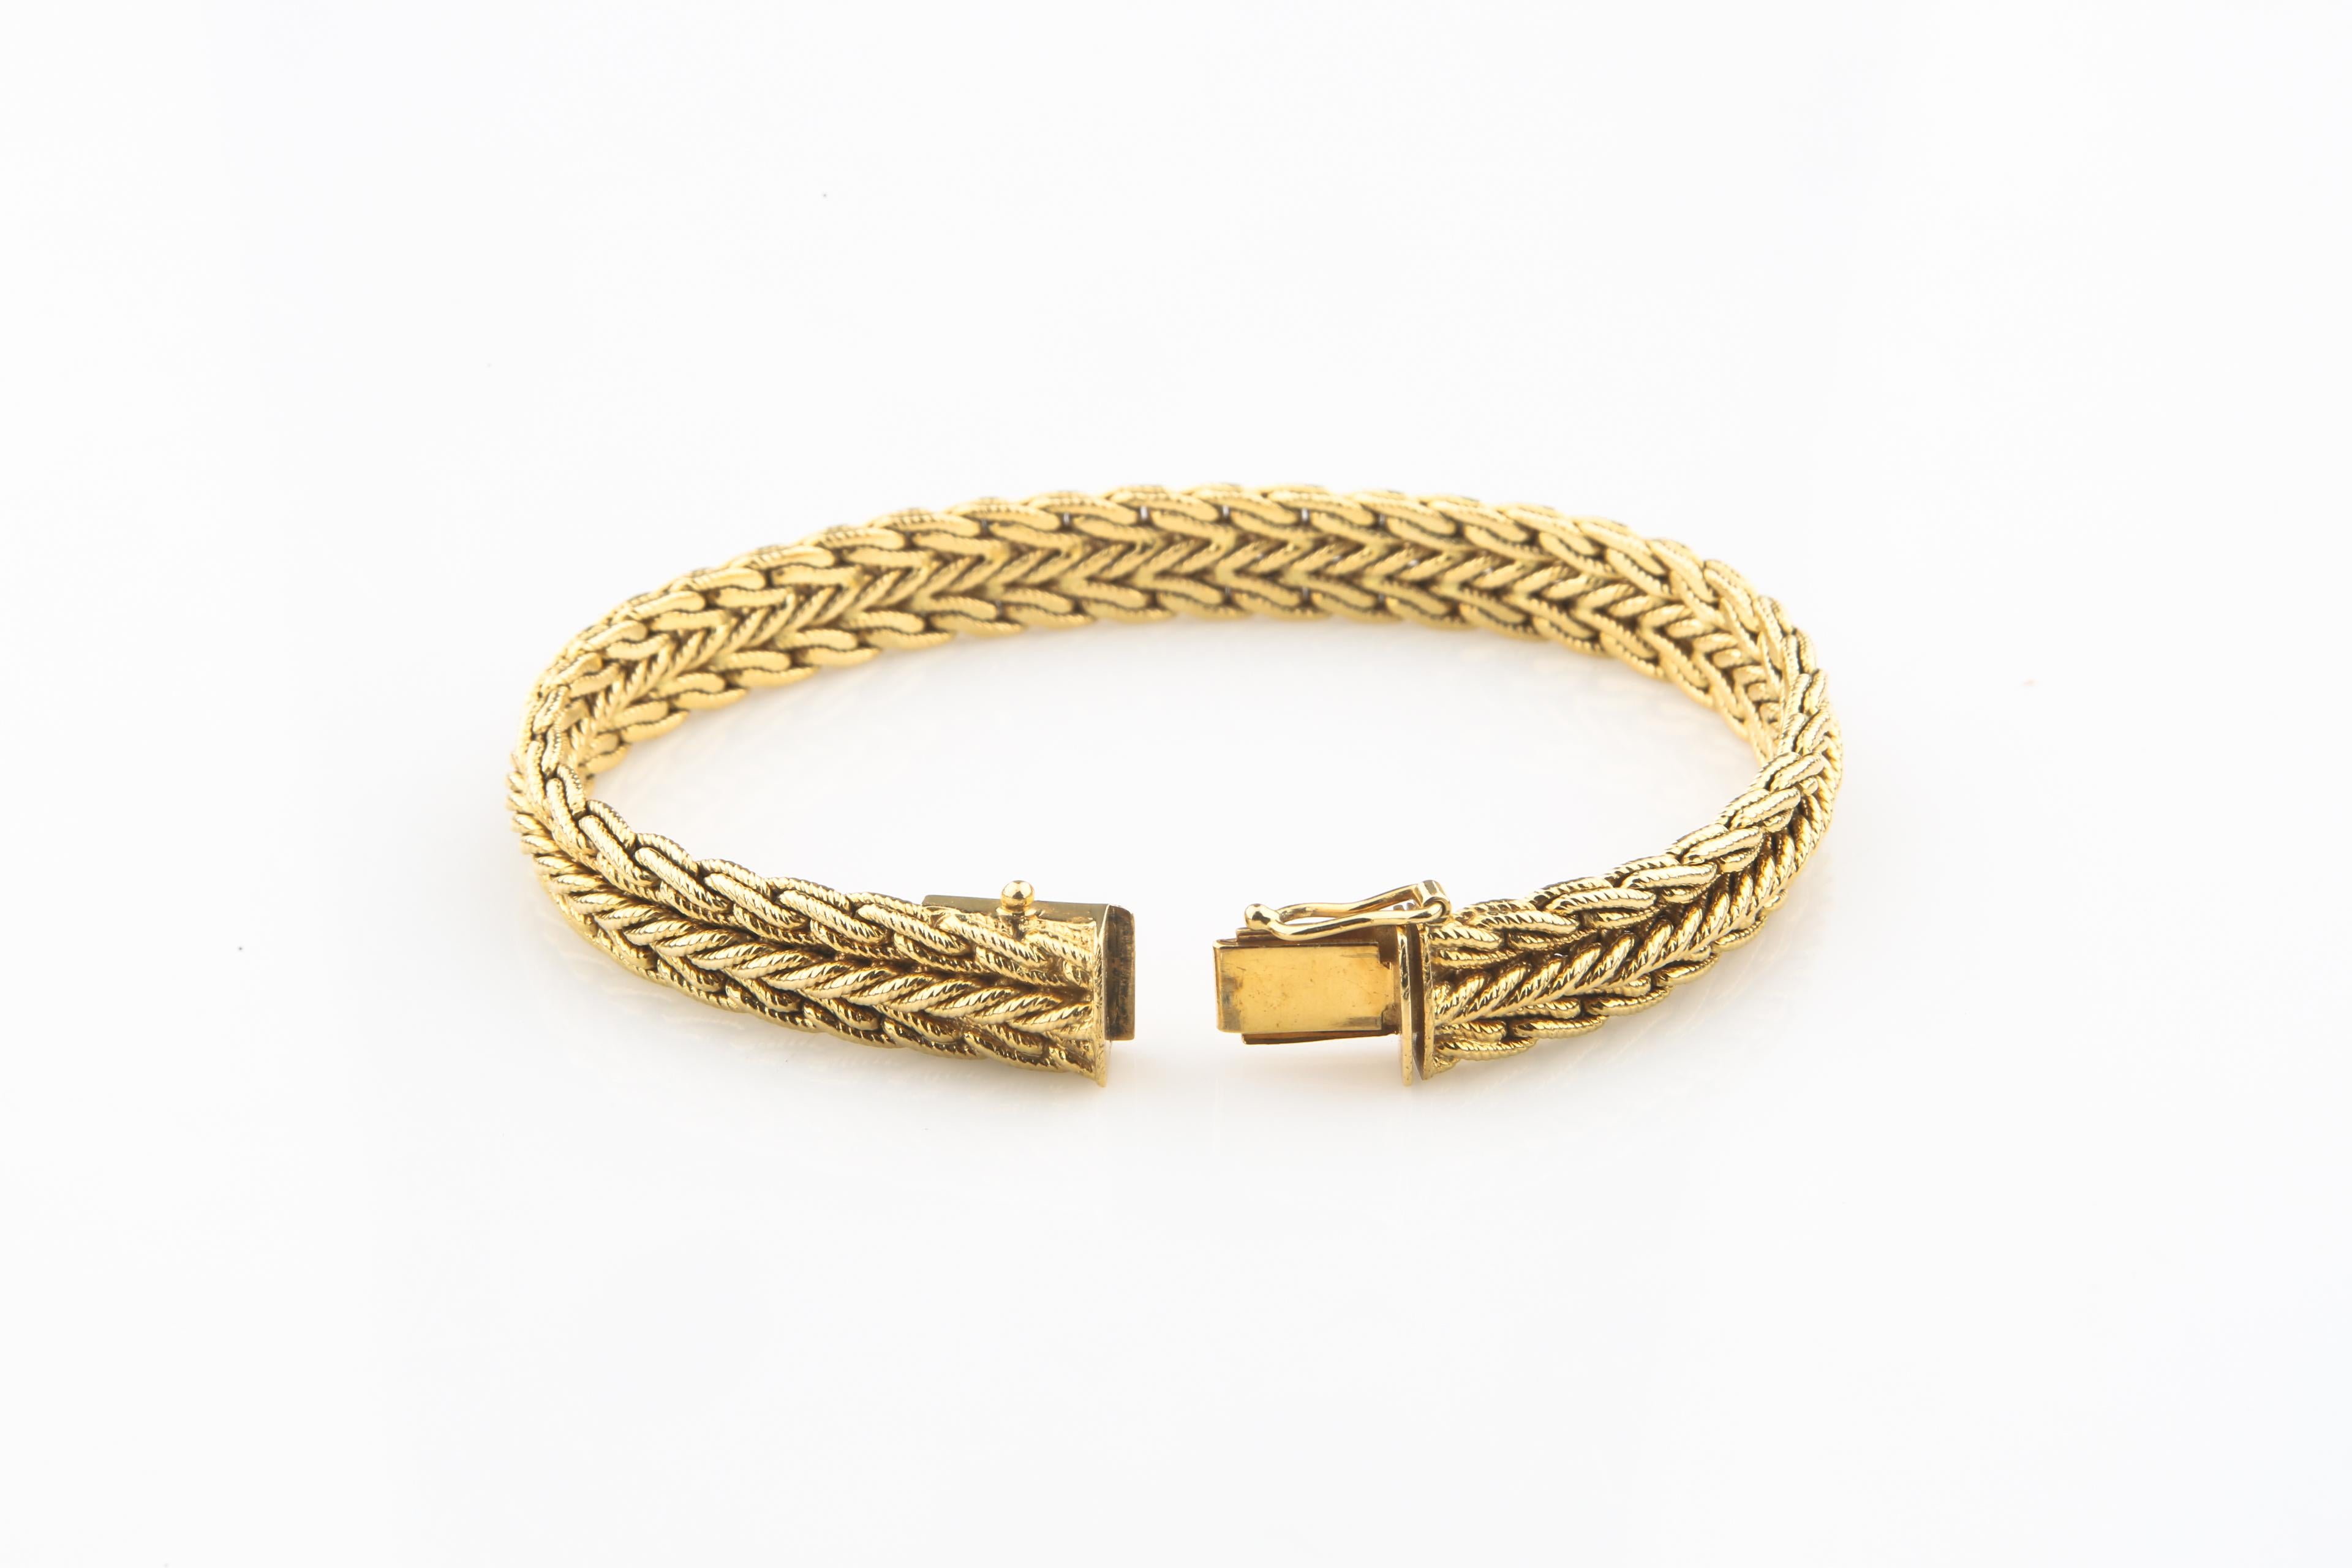 Gorgeous Vintage 18k Yellow Gold Woven Mesh Bracelet by Tiffany & Co.
Made in West Germany
7.5